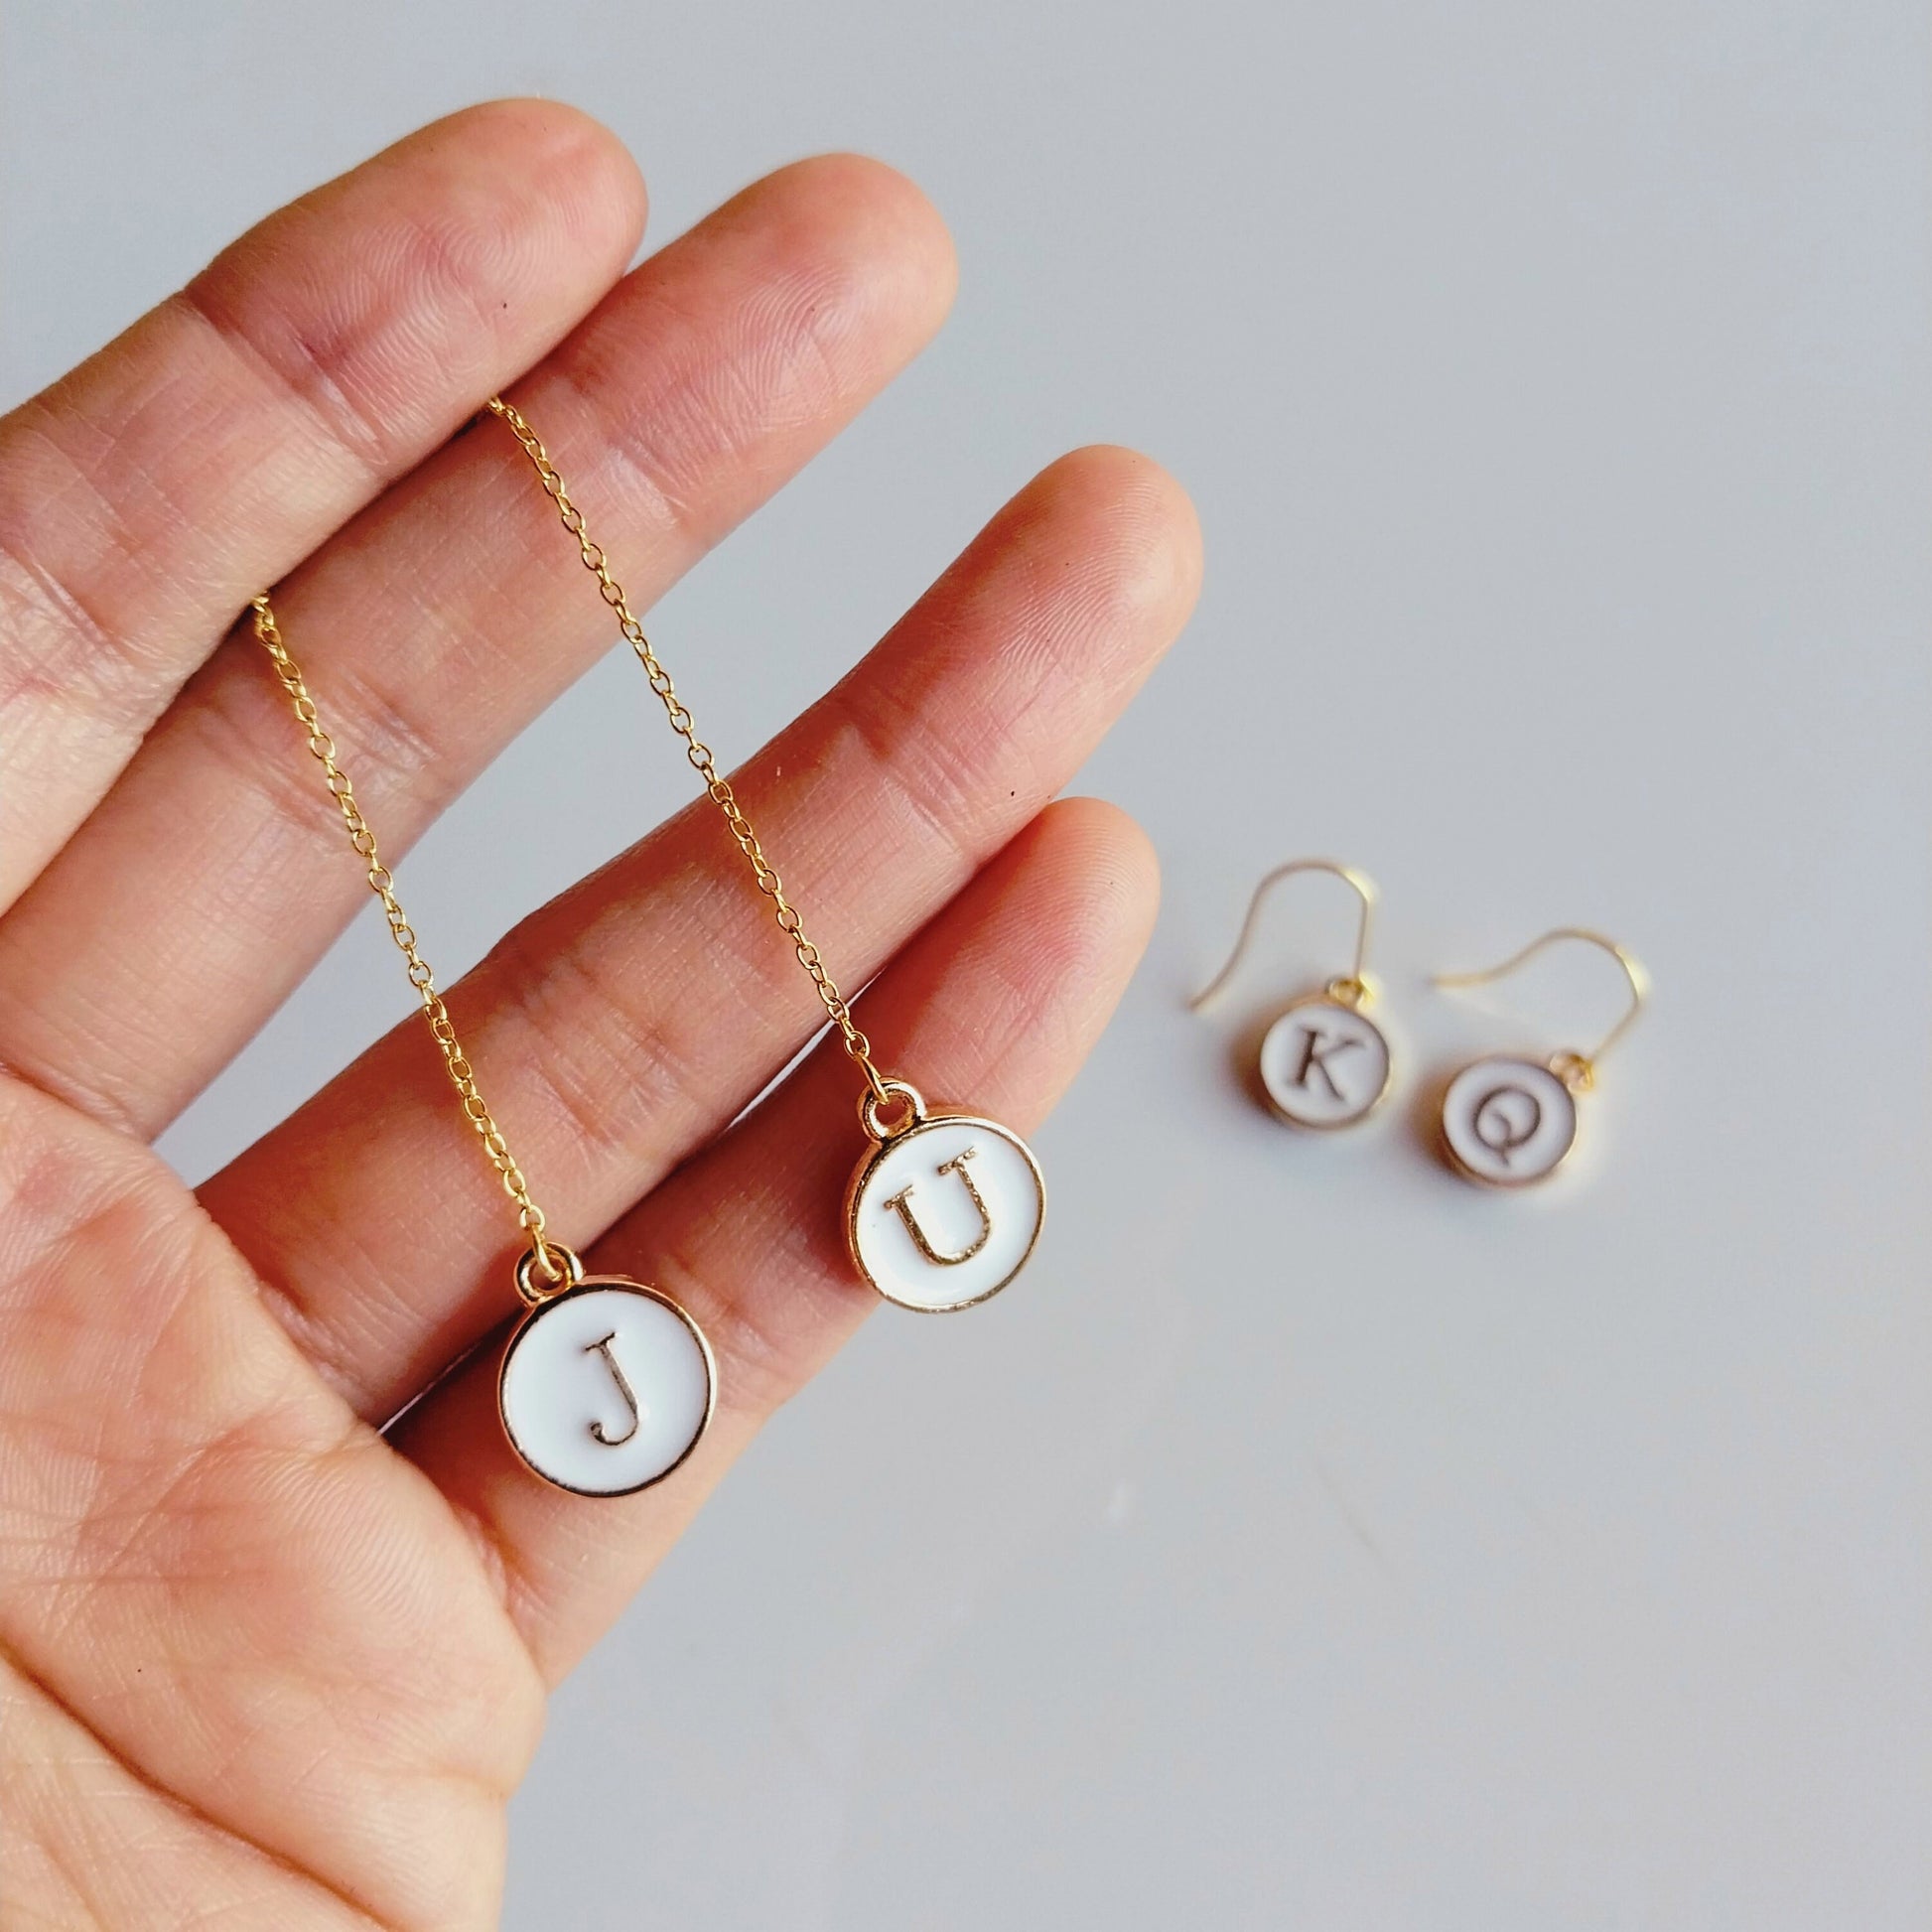 Personalised White Initial Earrings Gold Threader French Hook personalized letter accessories jewellery name special gift stainless steel